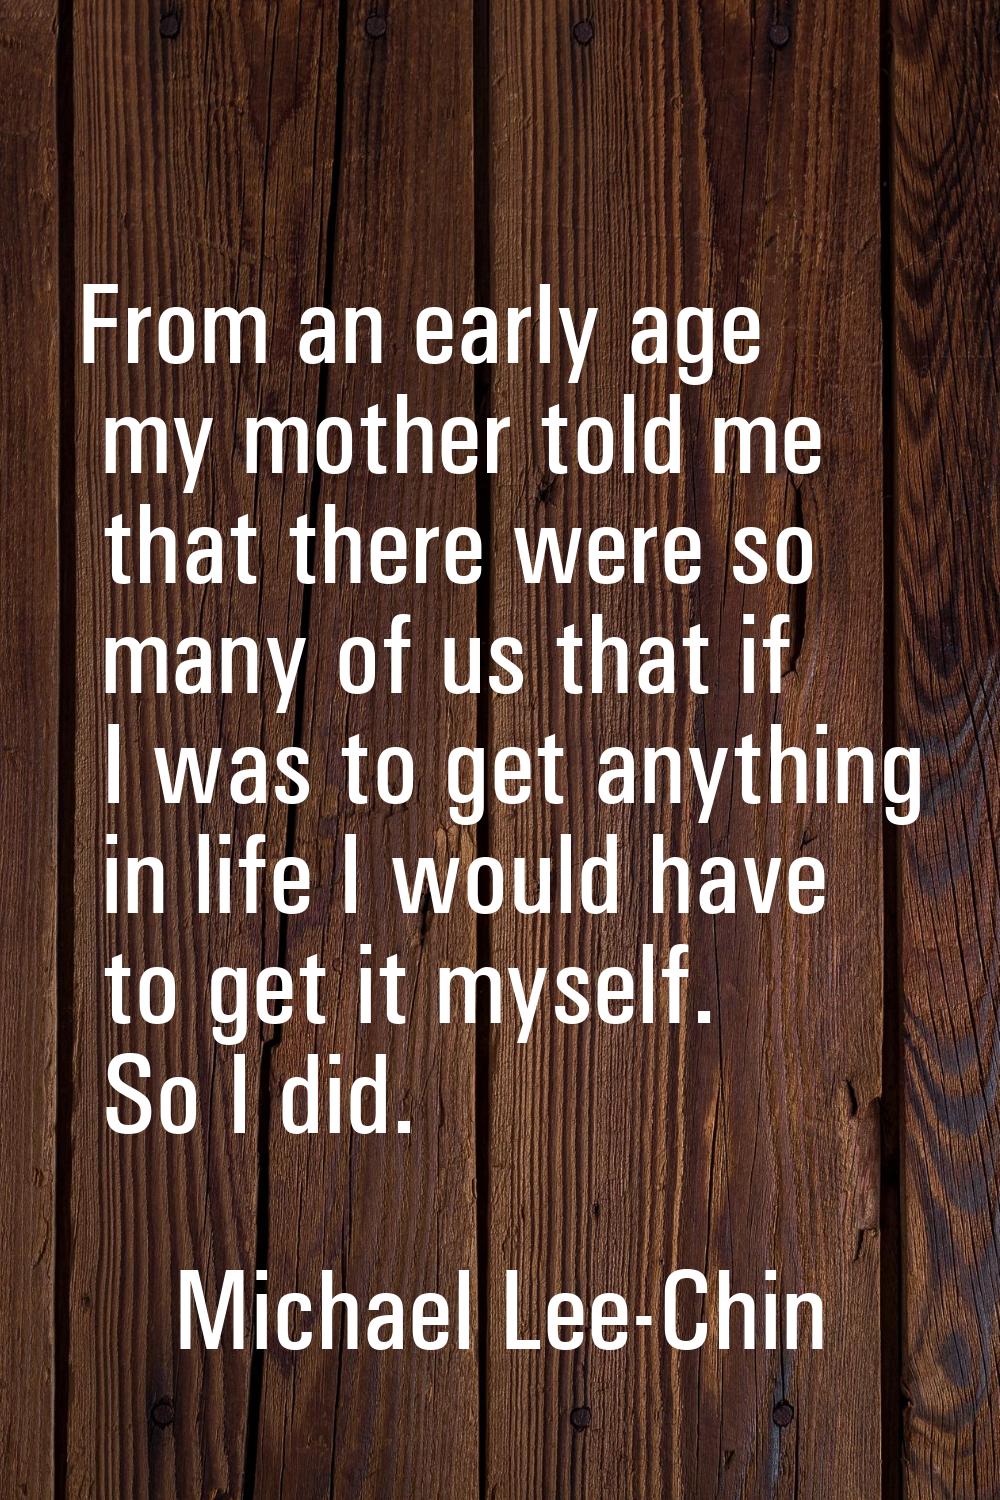 From an early age my mother told me that there were so many of us that if I was to get anything in 